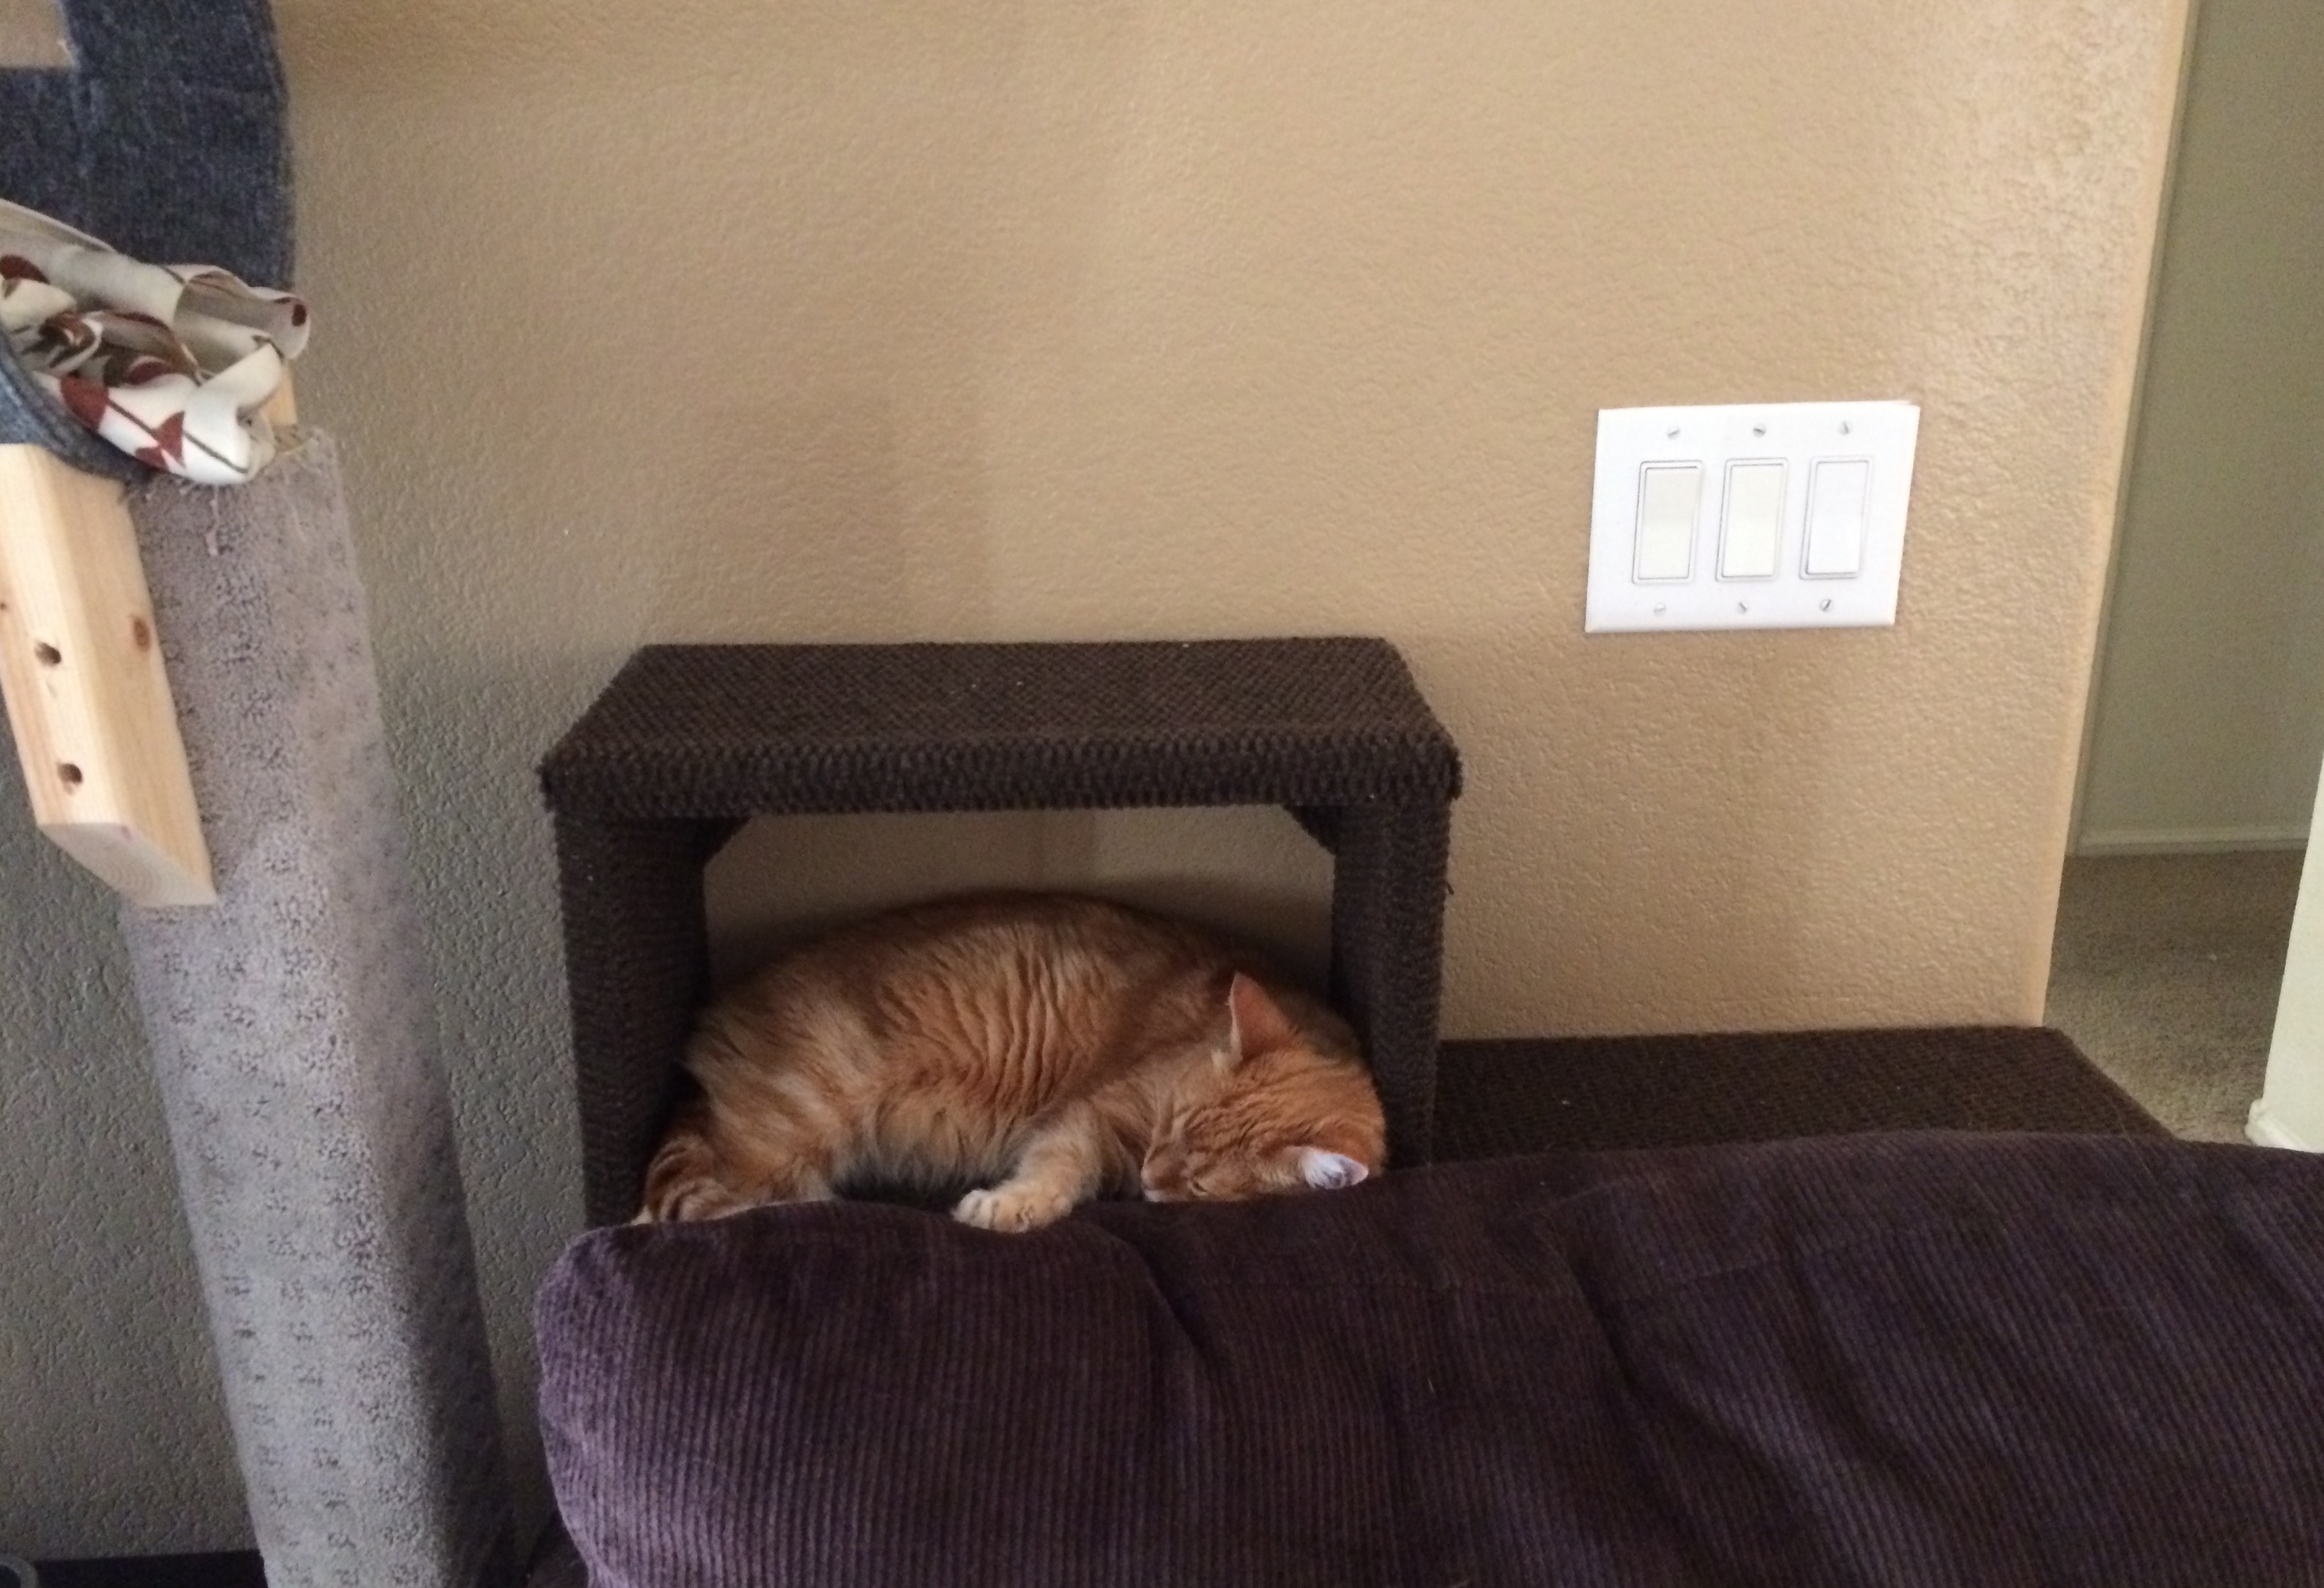 An orange tabby sleeping in the space between a step and the back of a chair.